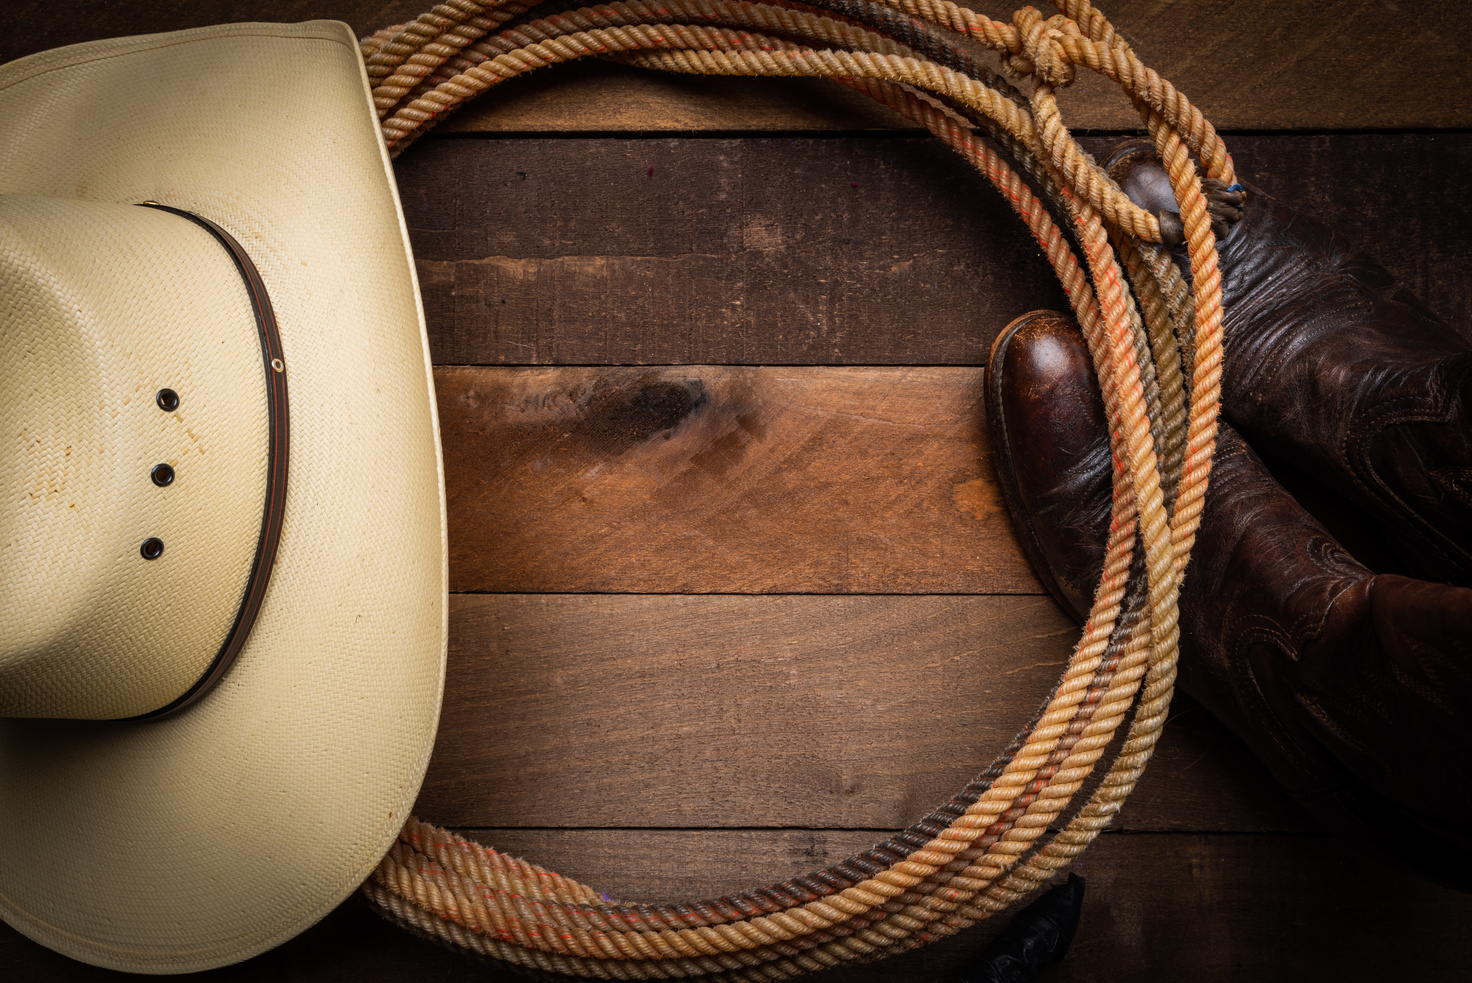 Cowboy Supplies on wood background